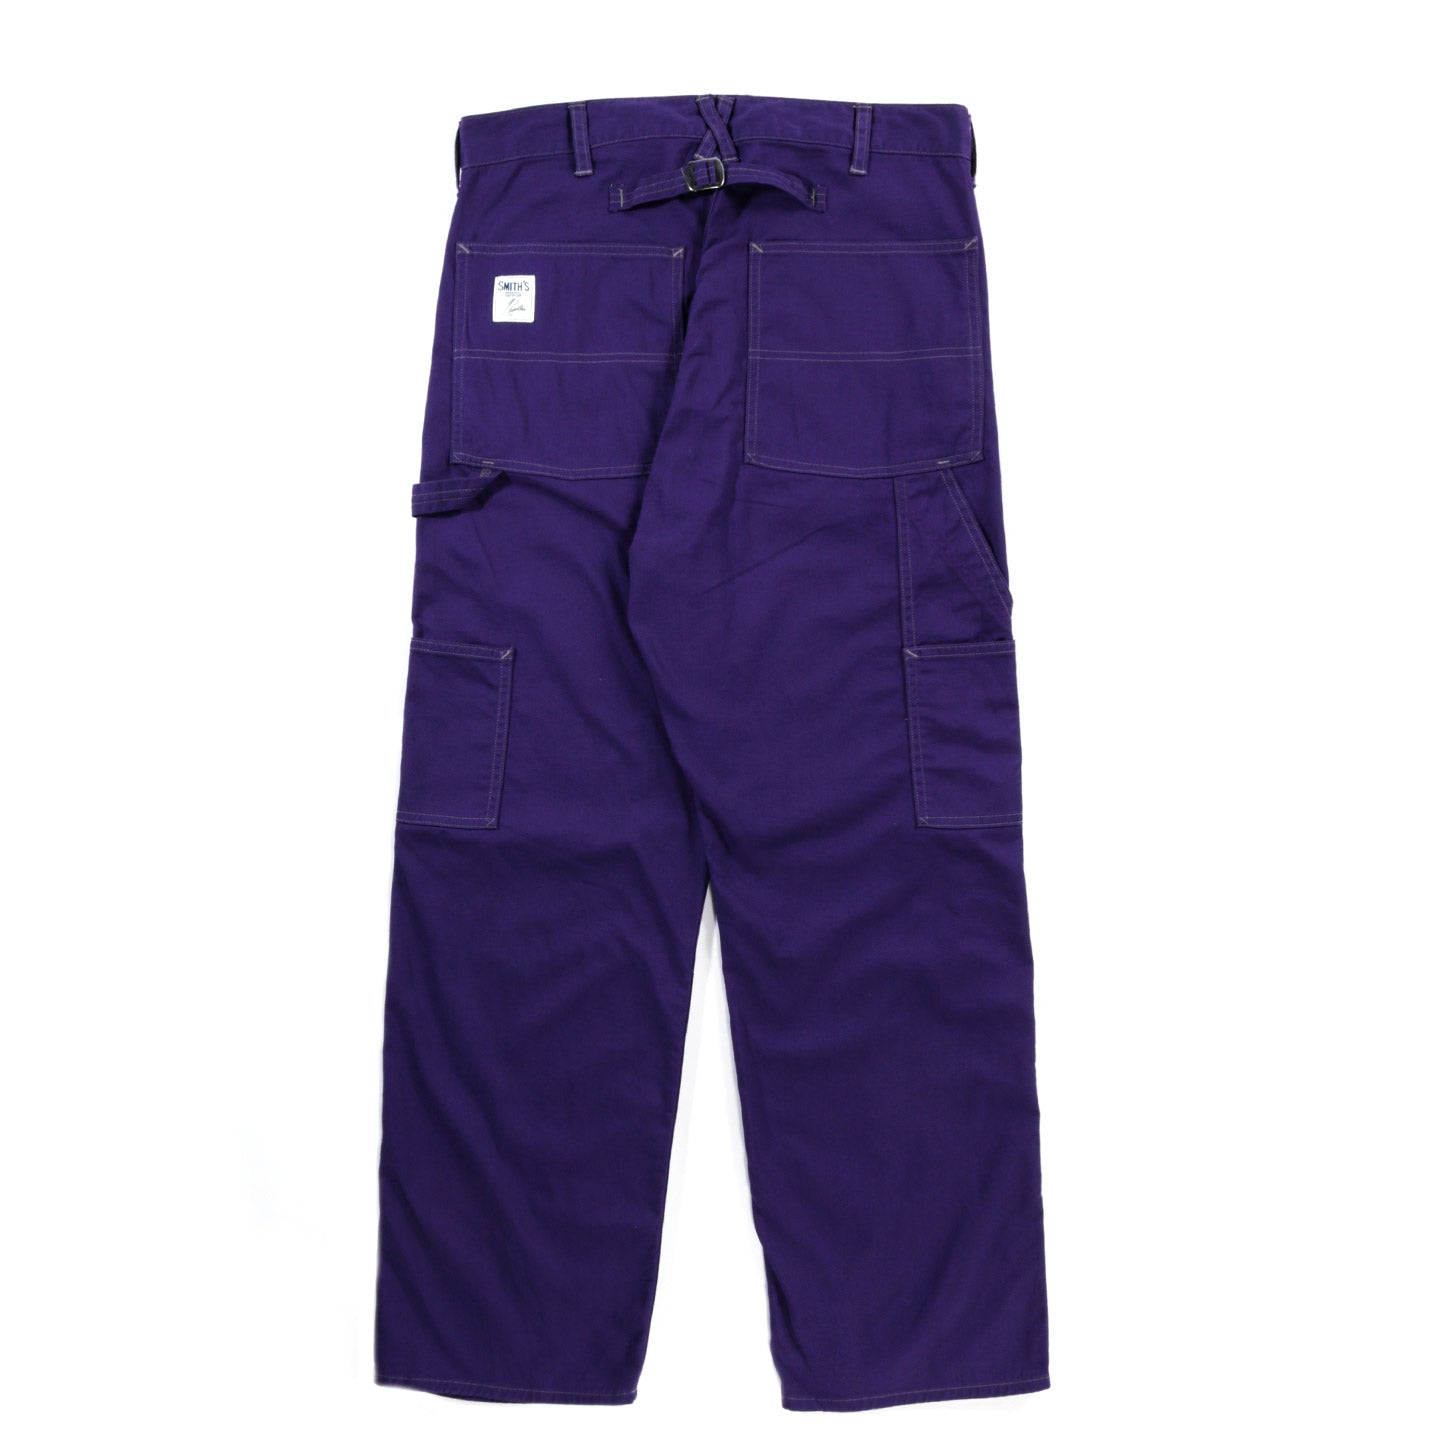 NEEDLES X SMITH'S PAINTER PANT COTTON TWILL PURPLE | TODAY CLOTHING